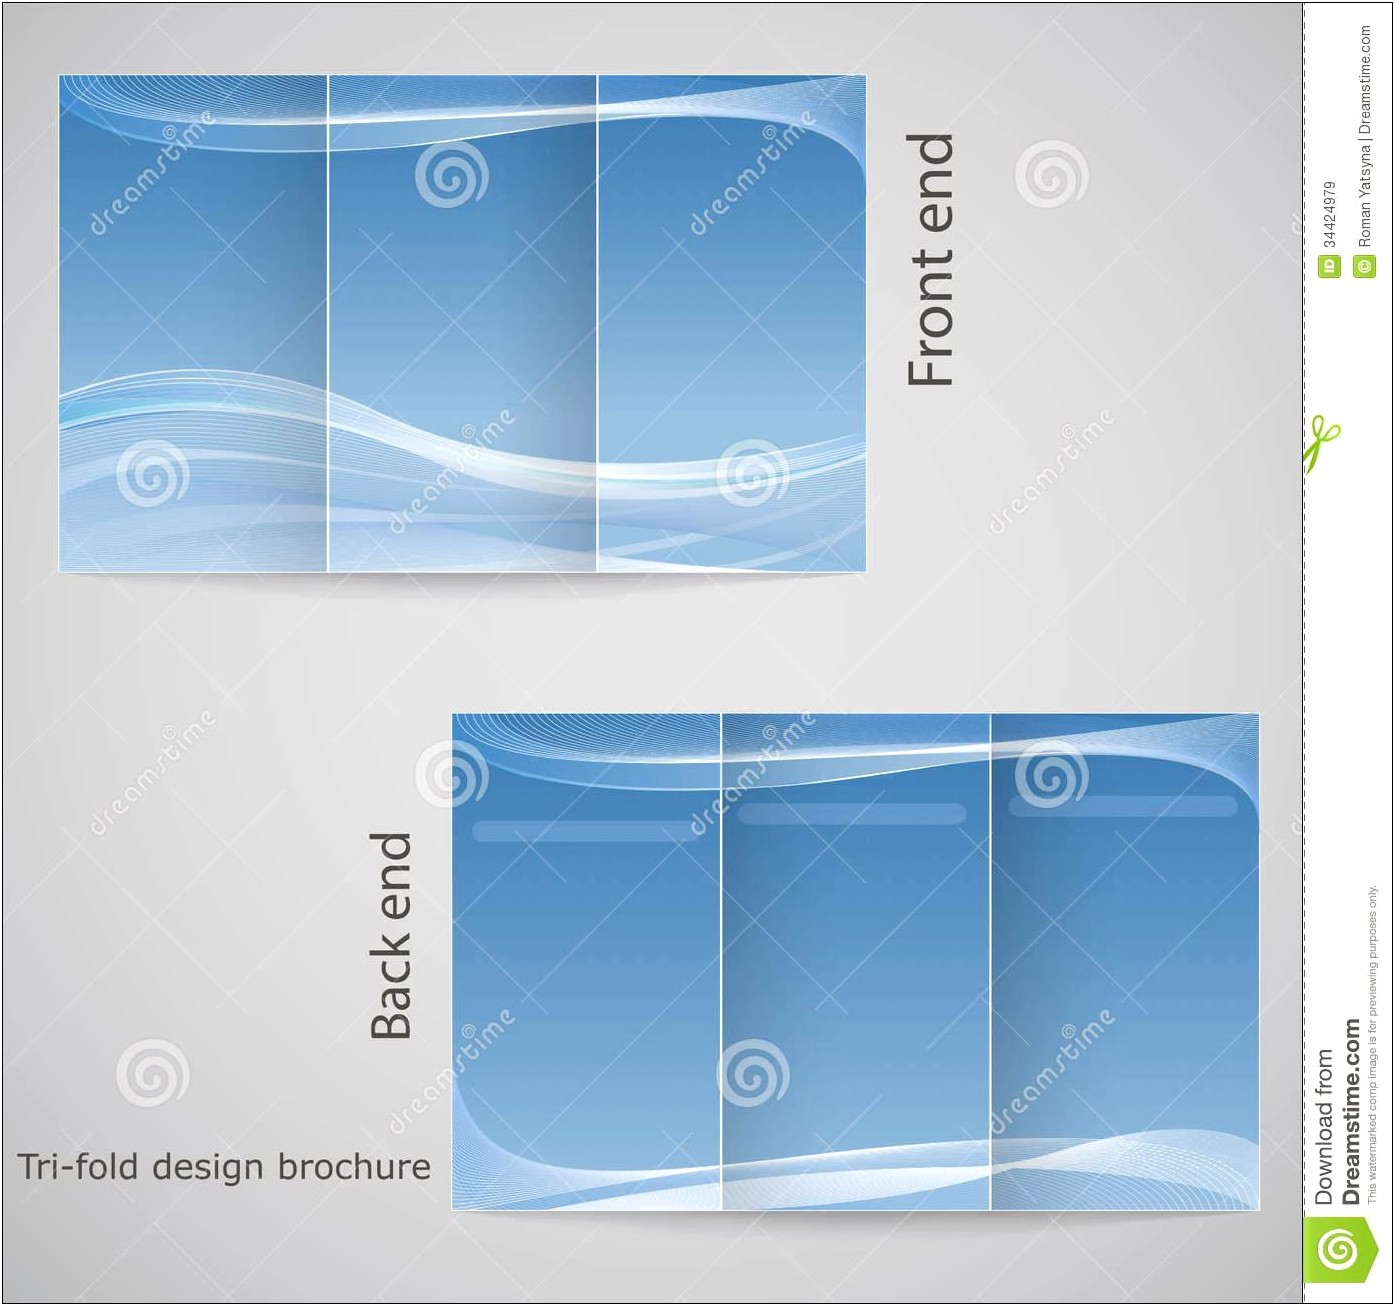 Microsoft Office Publisher Brochure Templates Free Download